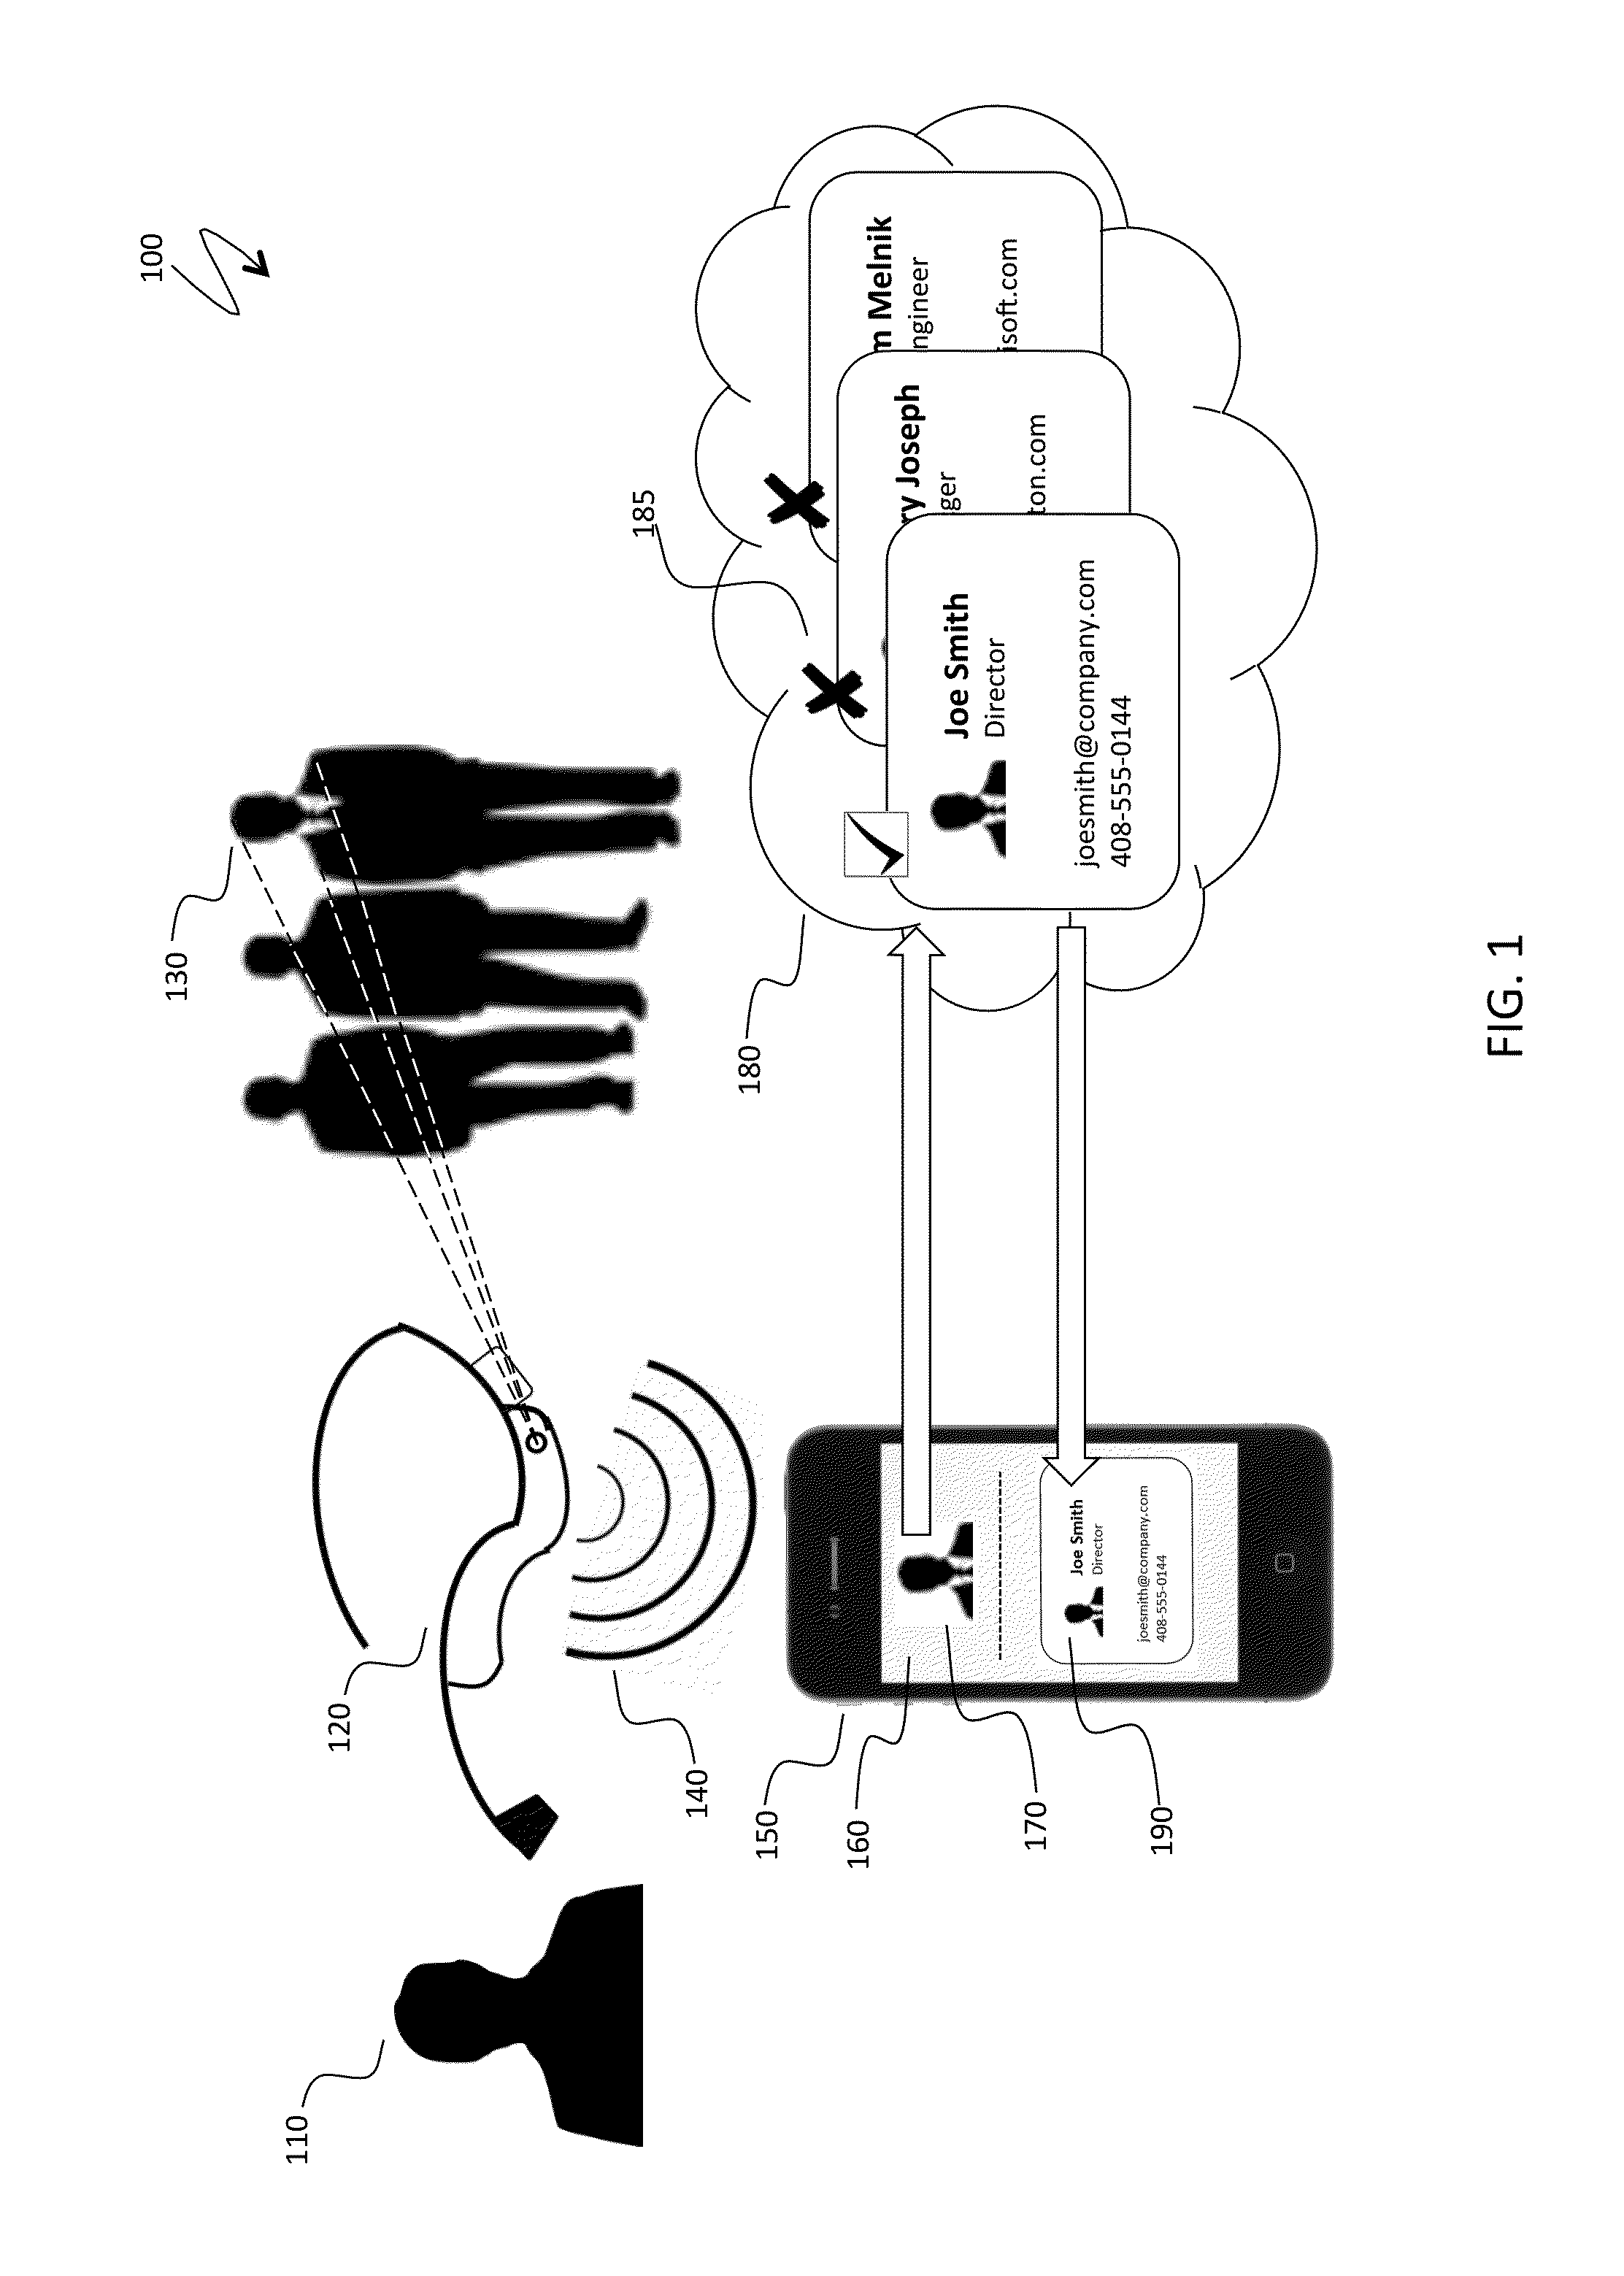 Distributed application functionality and user interface for multiple connected mobile devices